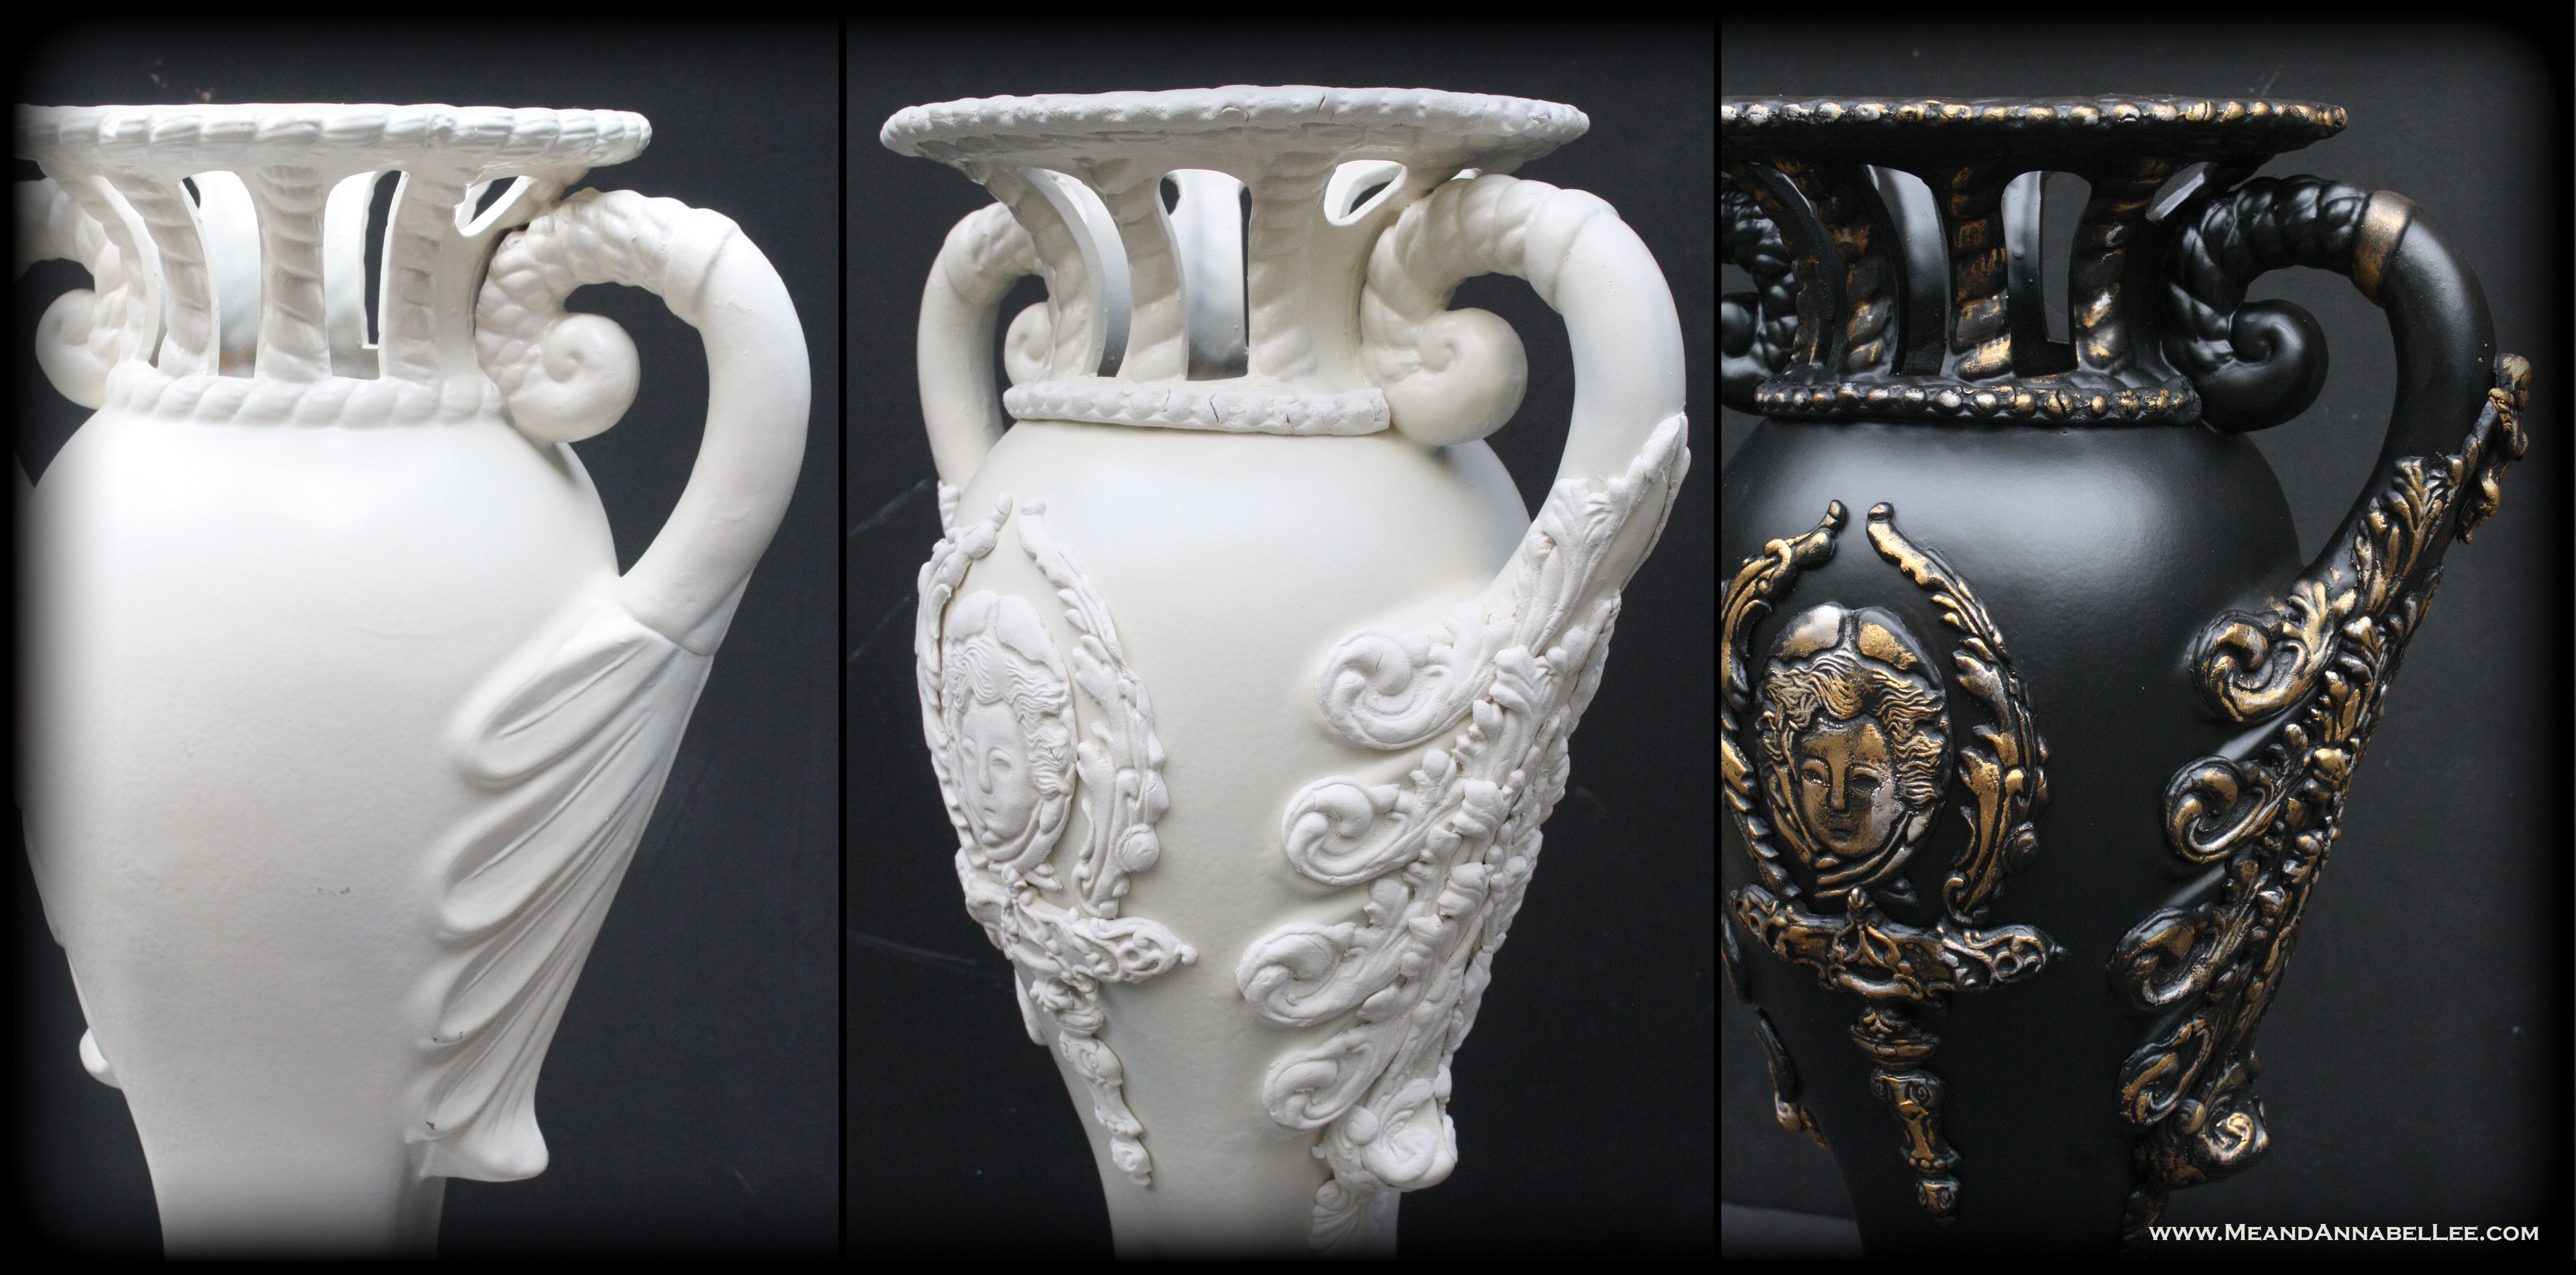 Trash to Treasure Transformation! DIY Victorian Gothic Vase | How to transform a thrift store vase using Iron Orchid Molds: Baroque, Escutcheon, Nautica, Mouldings, and Royale | Paper Clay Casting | Faux Antique Finish | Goth Home Decor | Grecian Gold Rub n Buff | www.MeandAnnabelLee.com